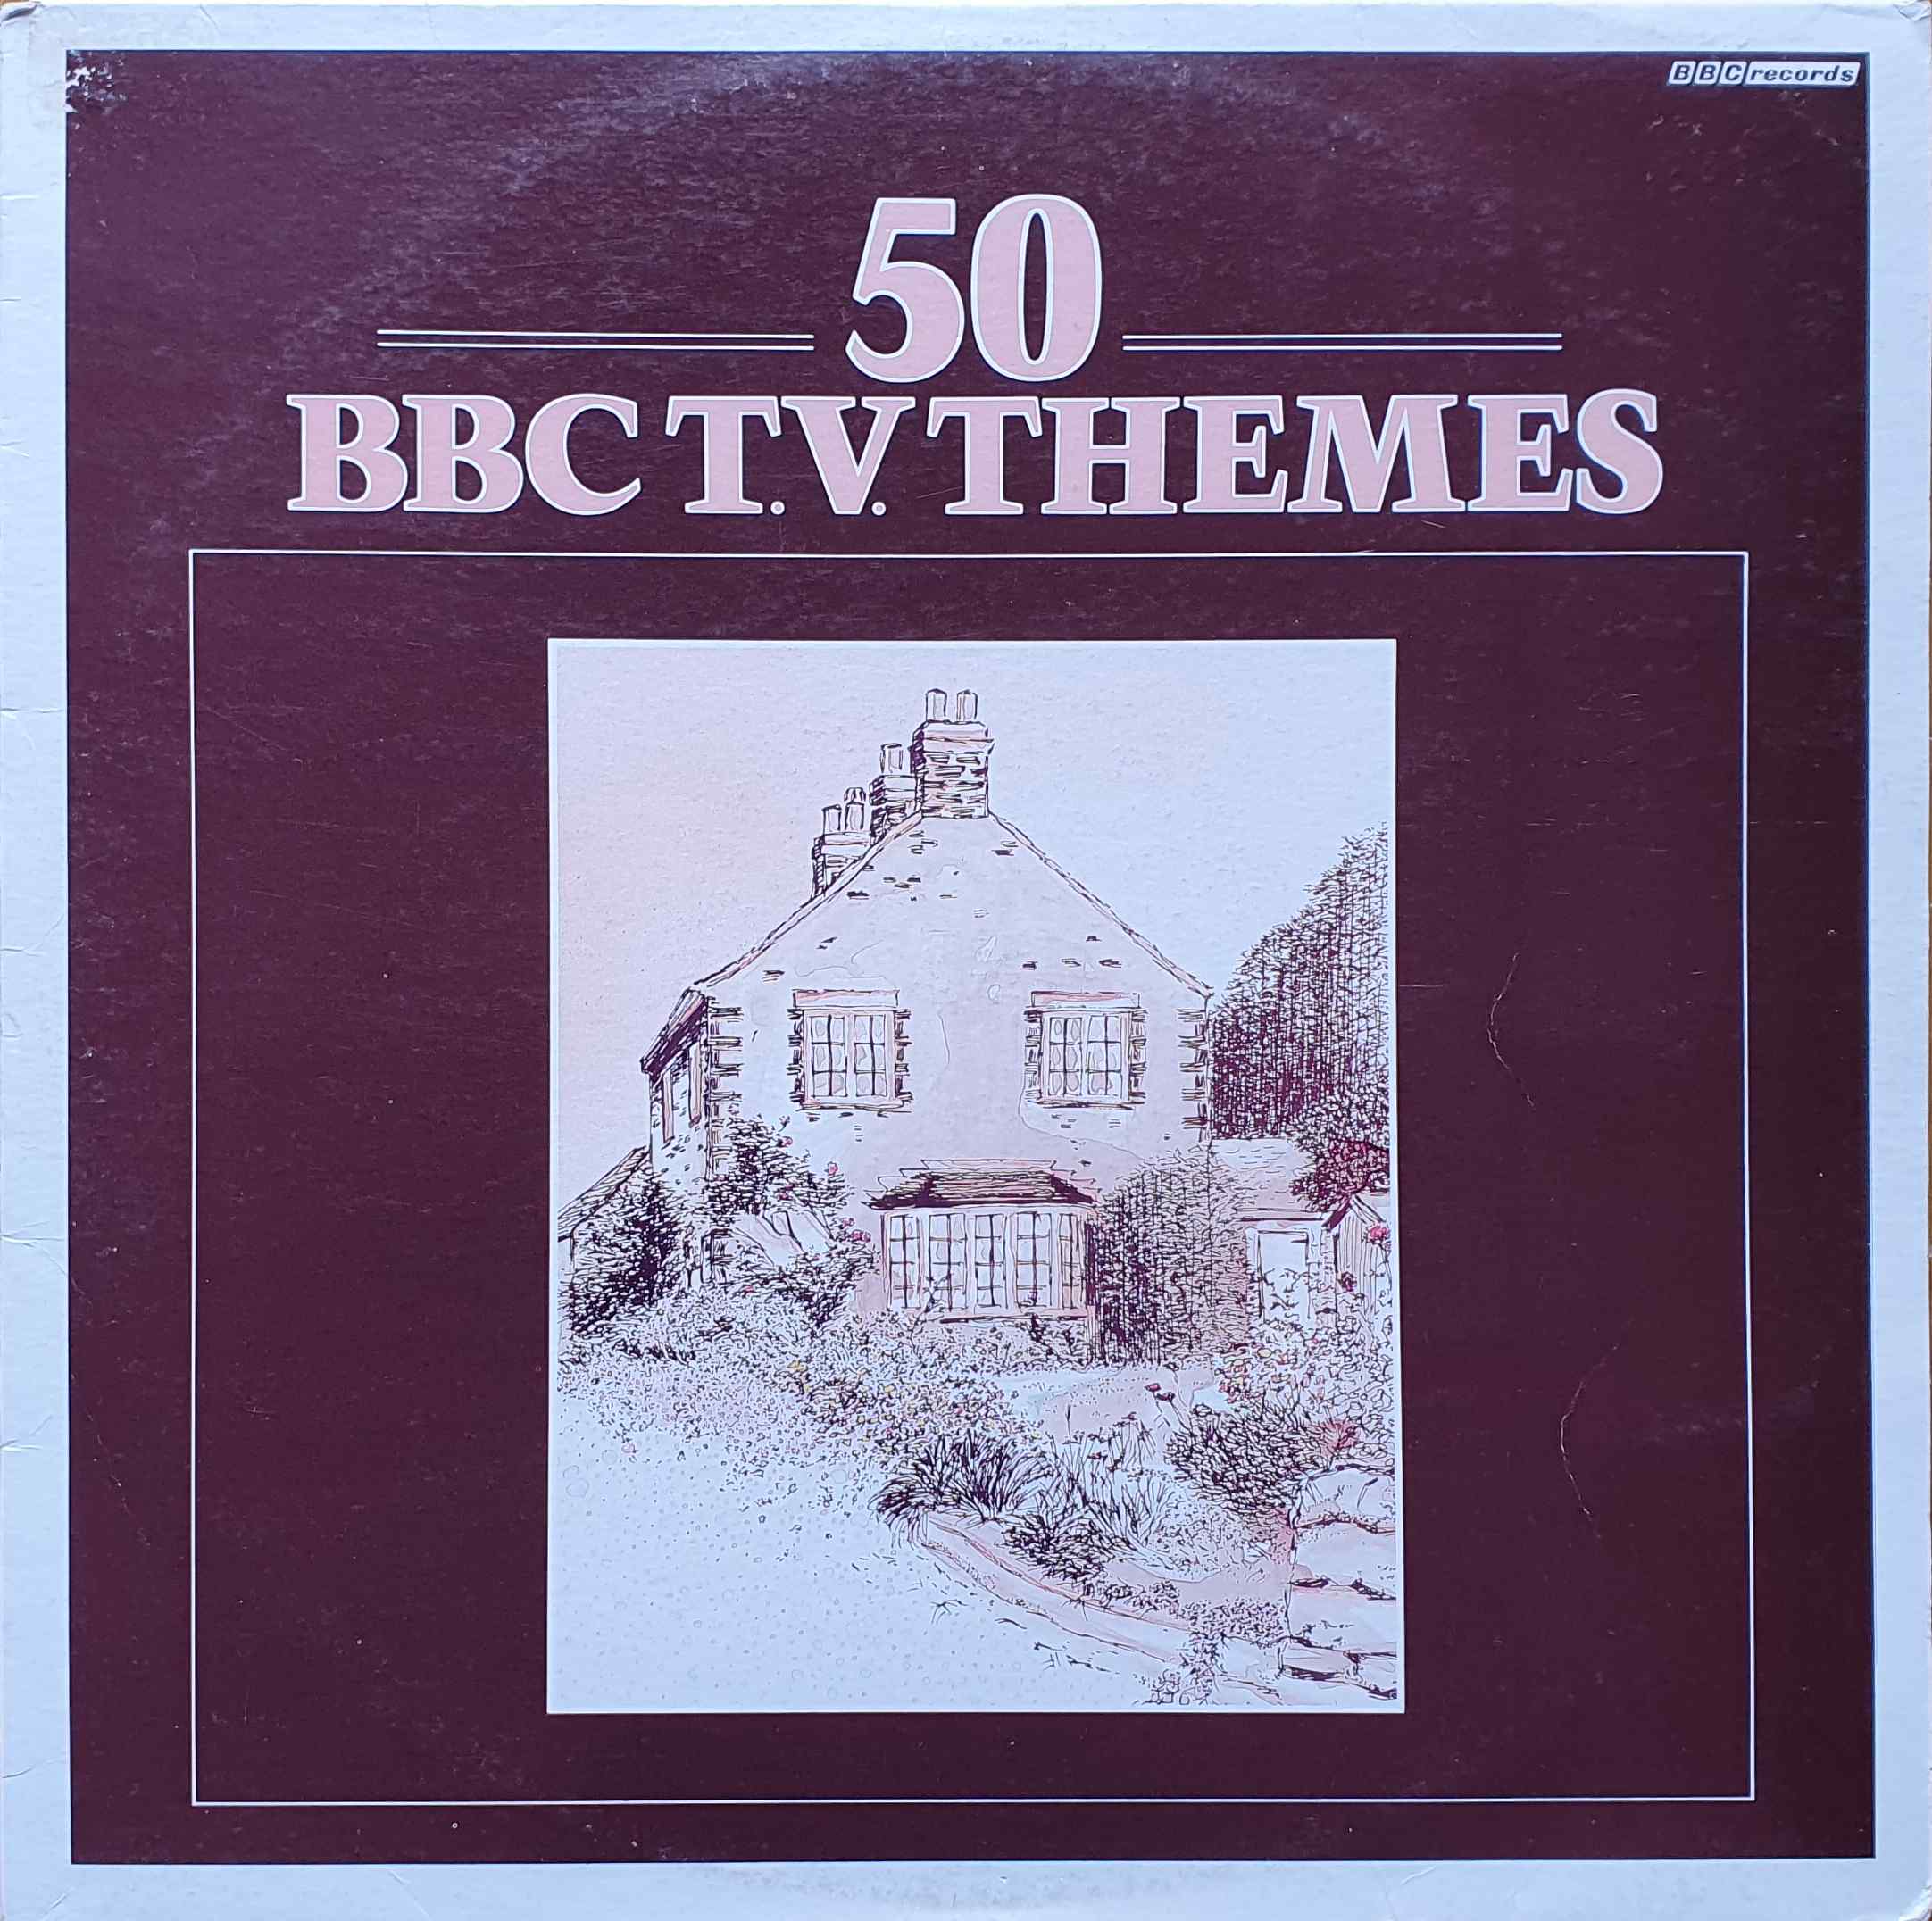 Picture of BBC 3006-iAUS 50 BBC TV themes (Australian import) by artist Various from the BBC albums - Records and Tapes library